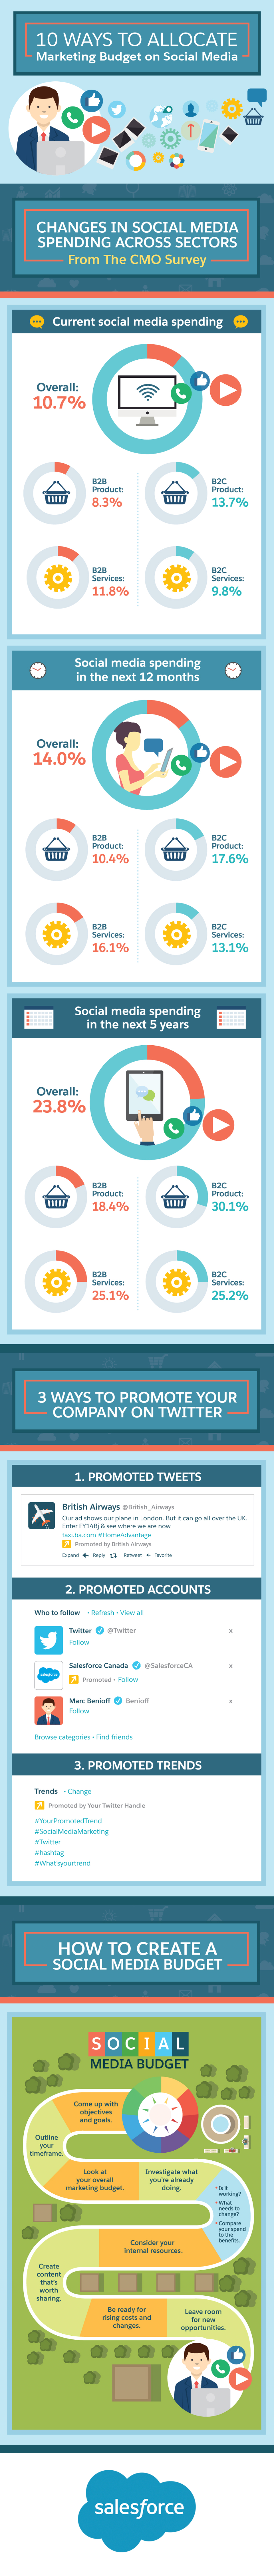 10 Ways to Use Your Marketing Budget to Advertise on Social Media